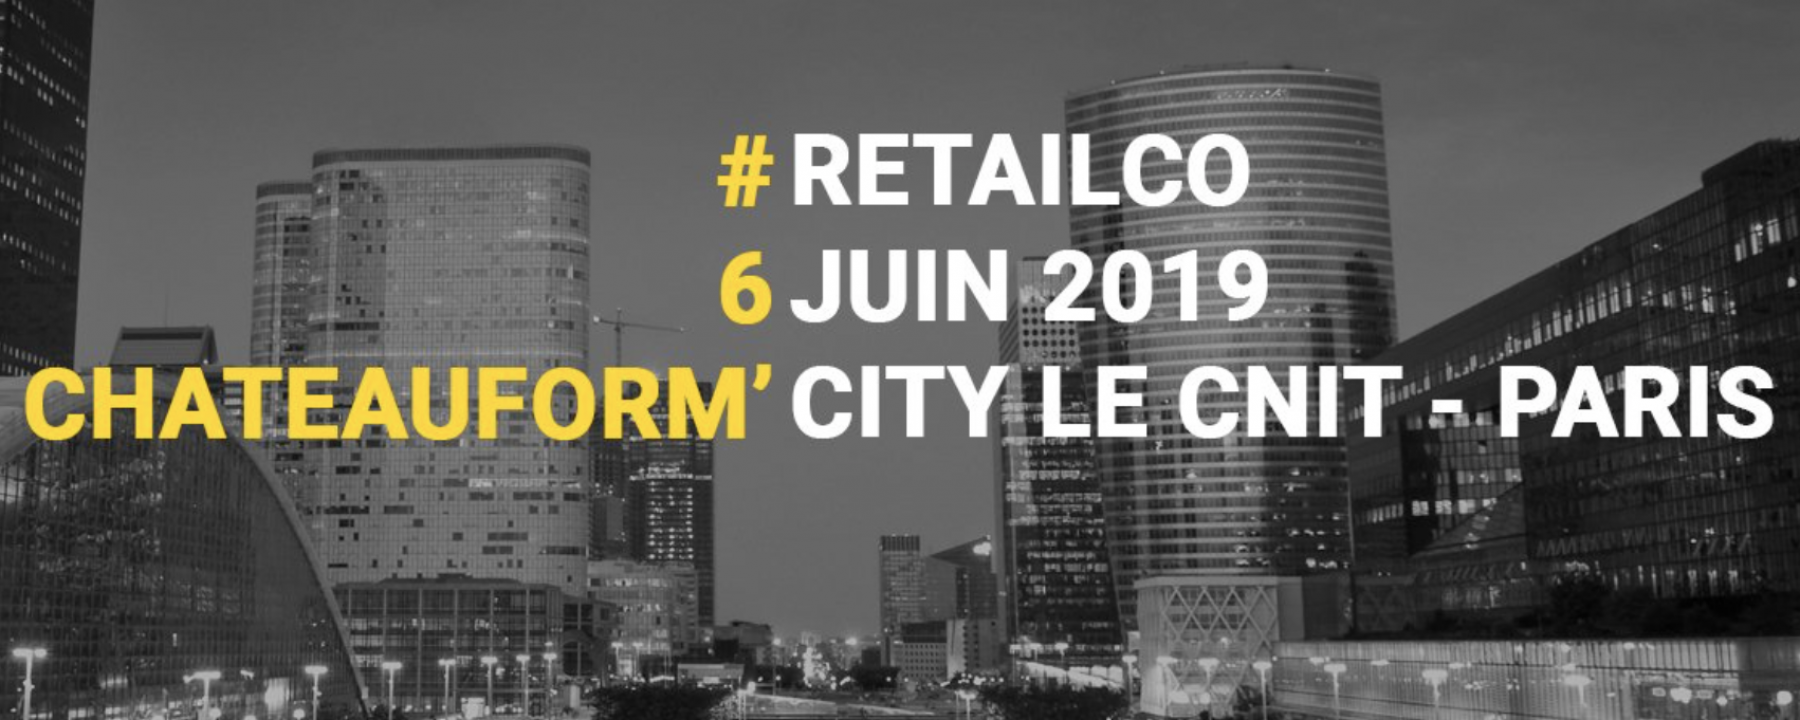 Retail Connect 2019